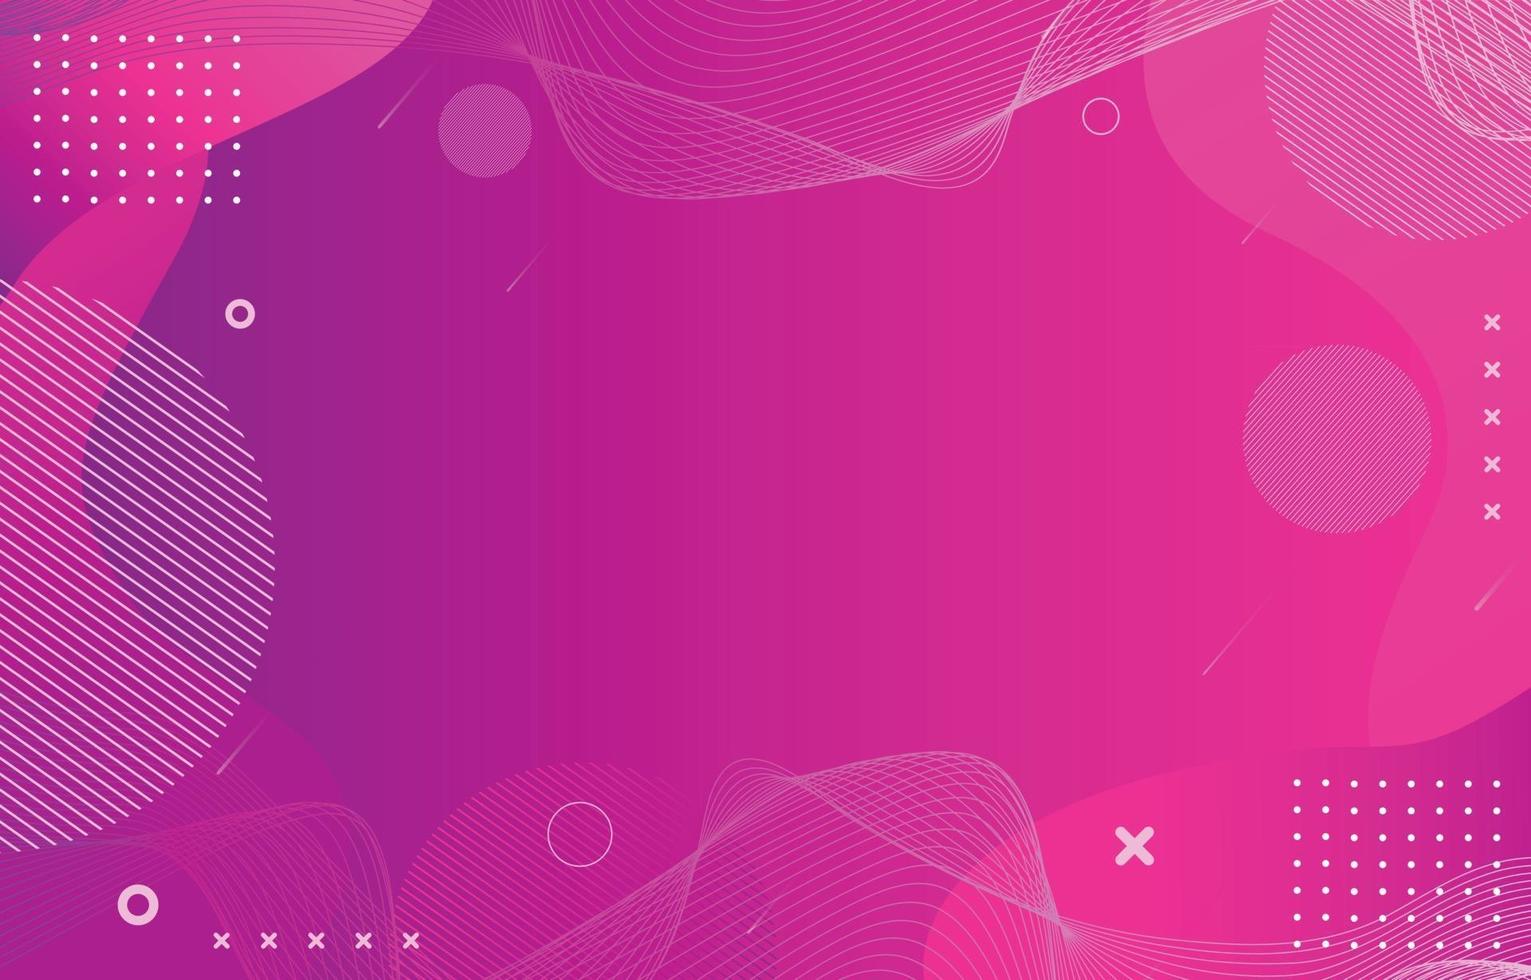 Beauty Abstract Pink Background vector